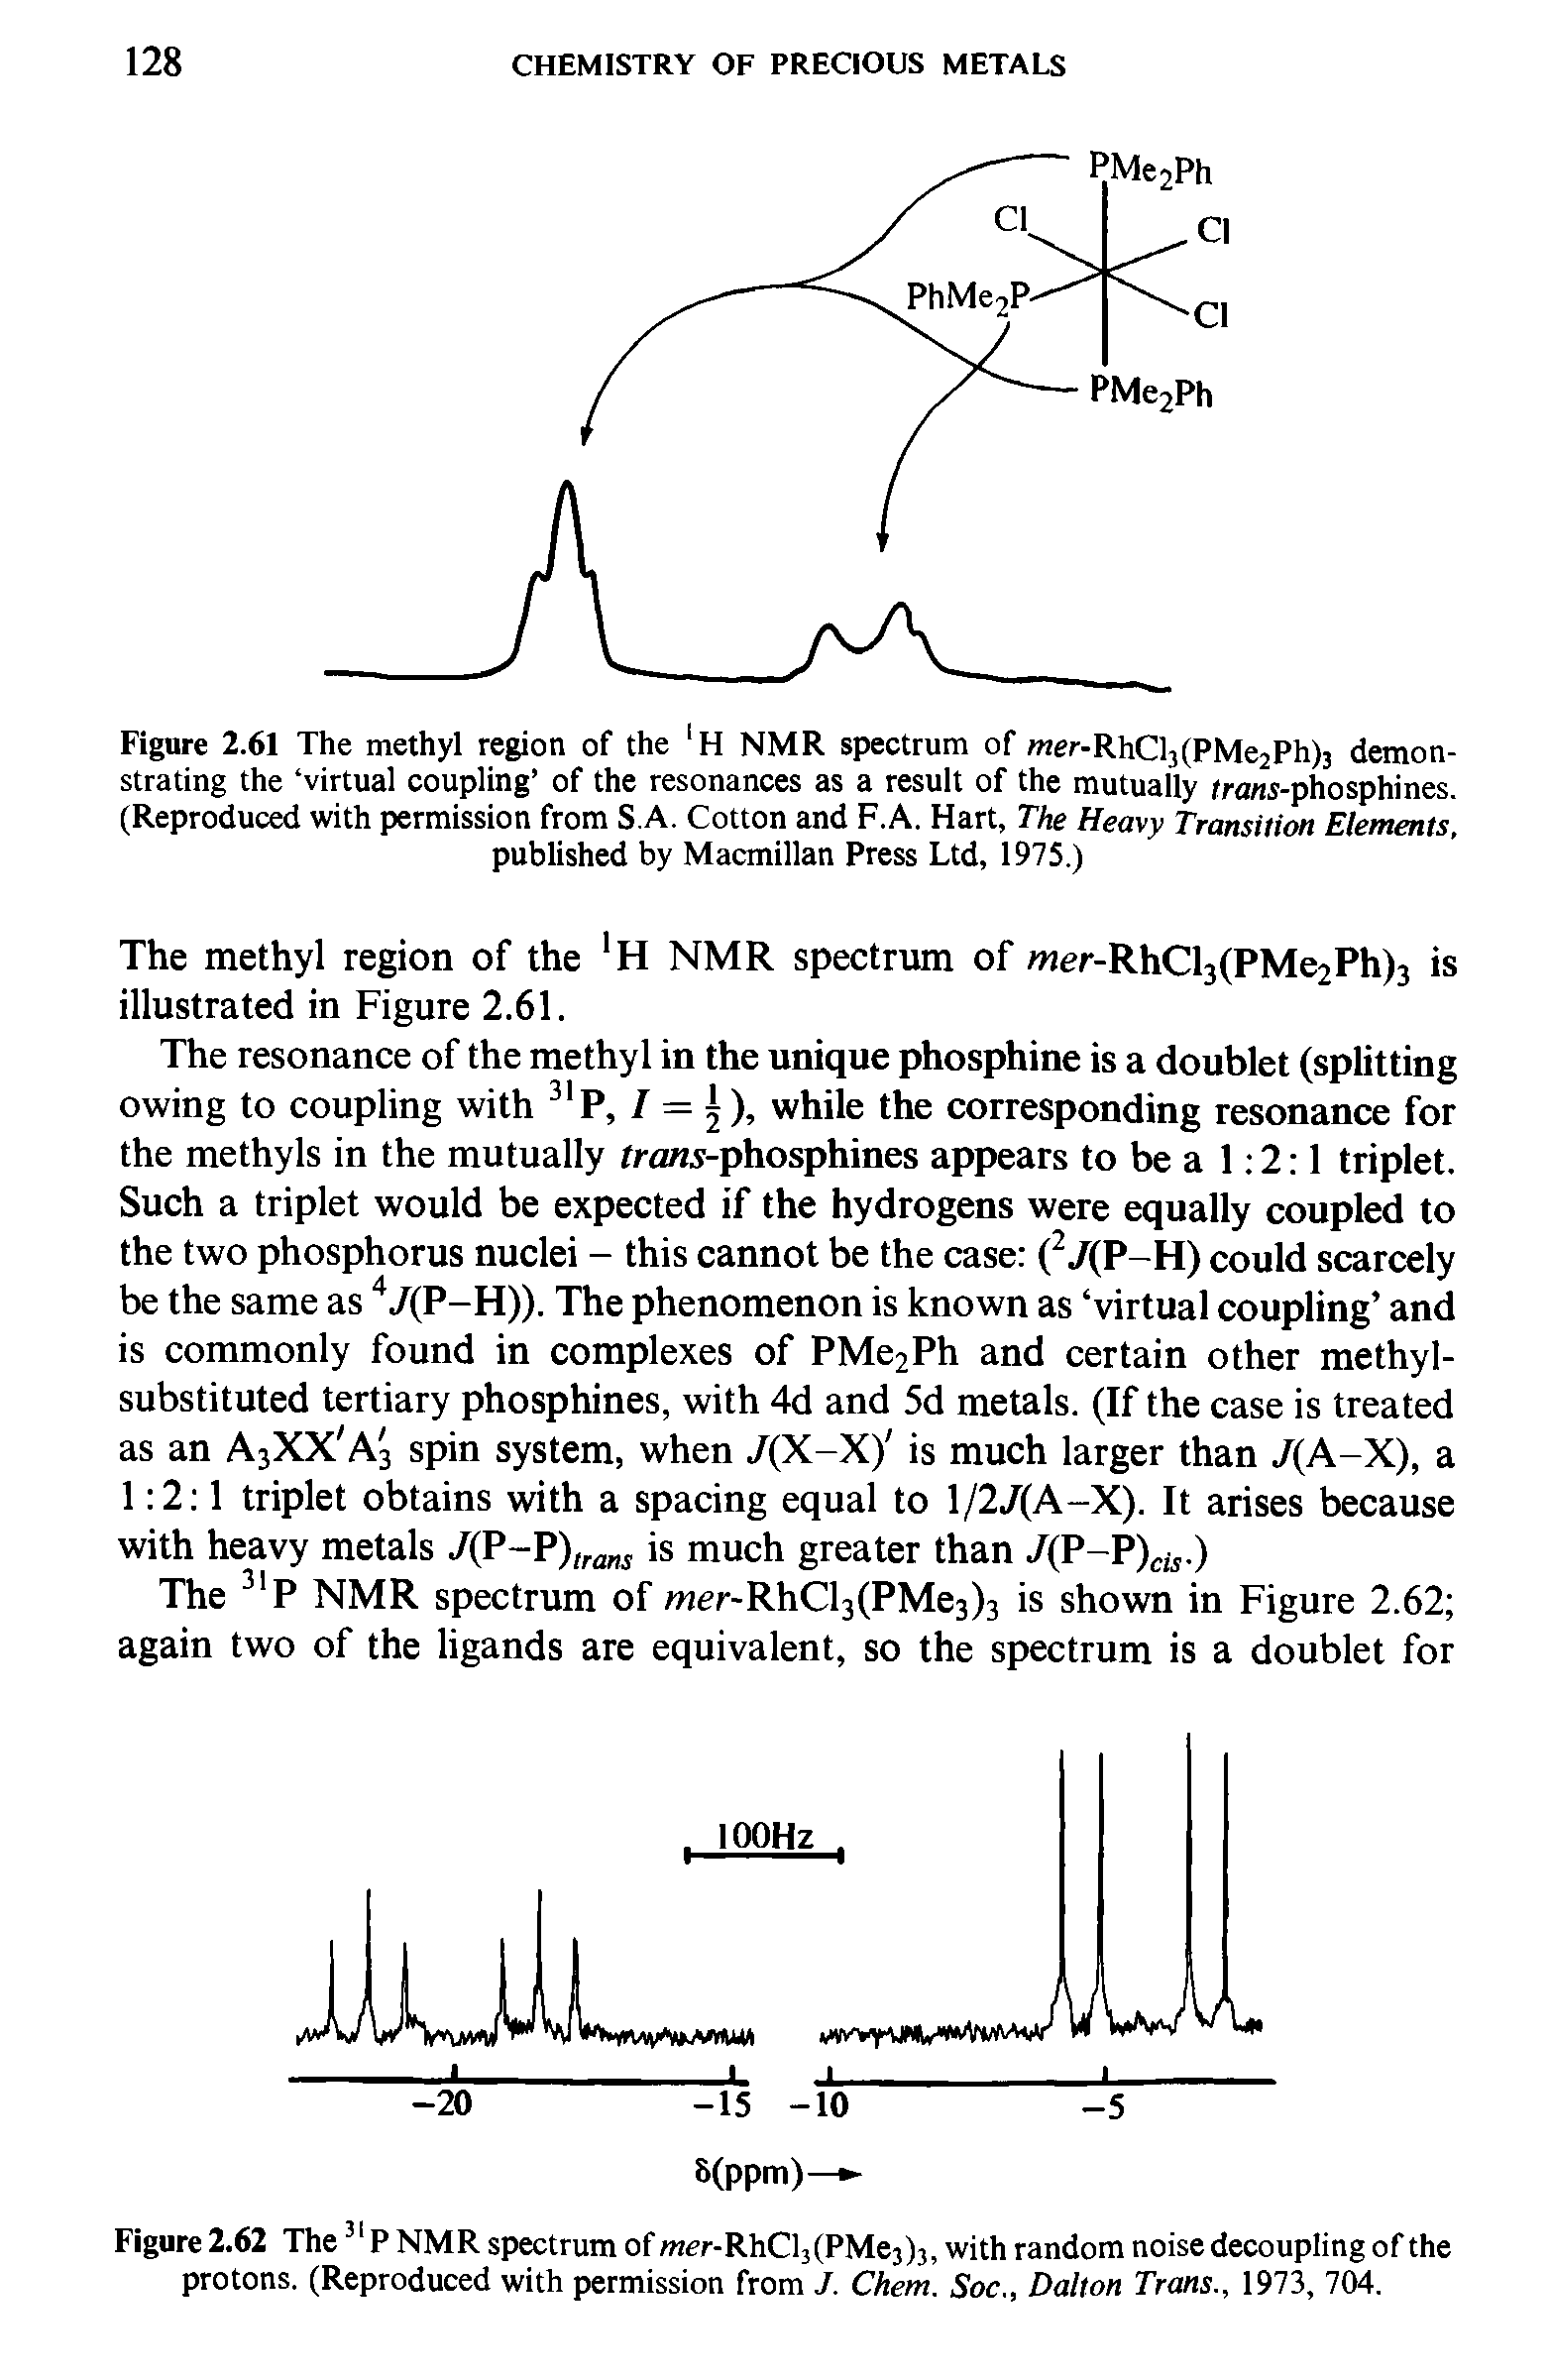 Figure 2.61 The methyl region of the H NMR spectrum of mer-RhCl1(PMe2Ph)3 demonstrating the virtual coupling of the resonances as a result of the mutually tra/w-phosphines. (Reproduced with permission from S.A. Cotton and F.A. Hart, The Heavy Transition Elements, published by Macmillan Press Ltd, 1975.)...